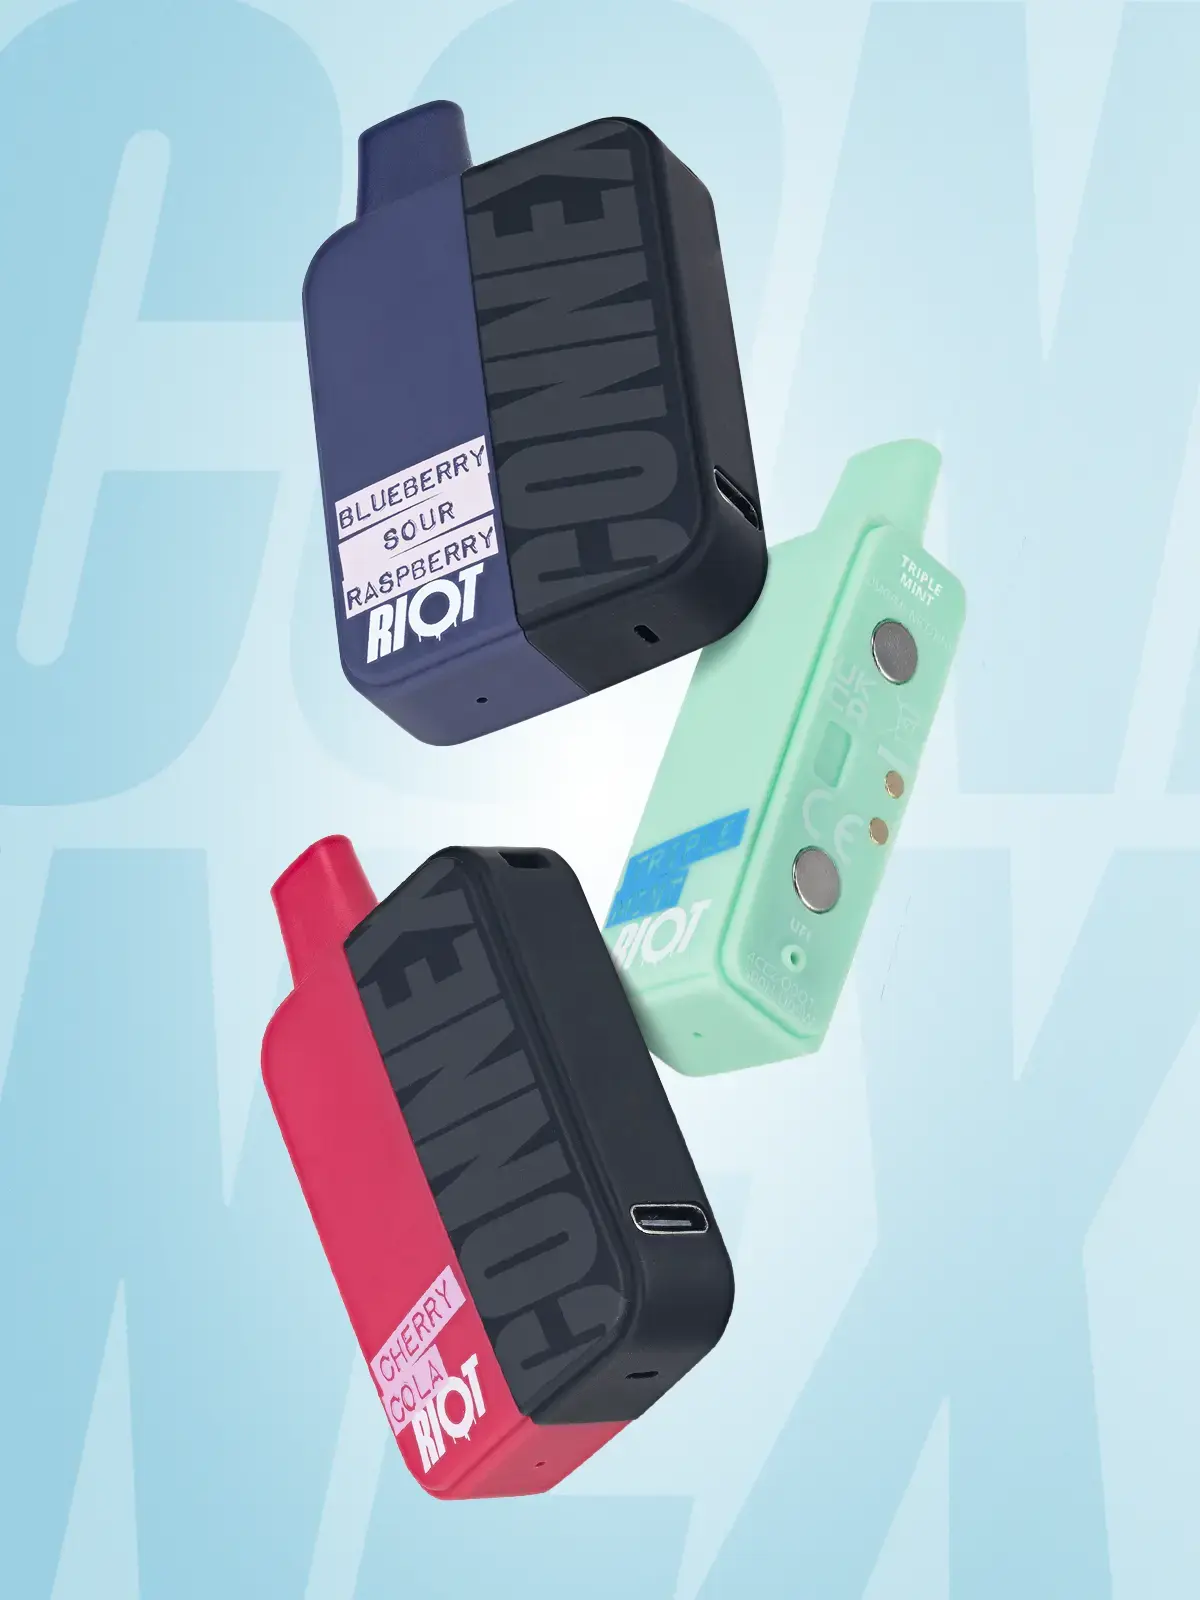 Three Riot Connex refills; Triple Mint, Blueberry Sour Raspberry and Cherry Cola with two attached to a Connex battery, floating in front of a light blue background